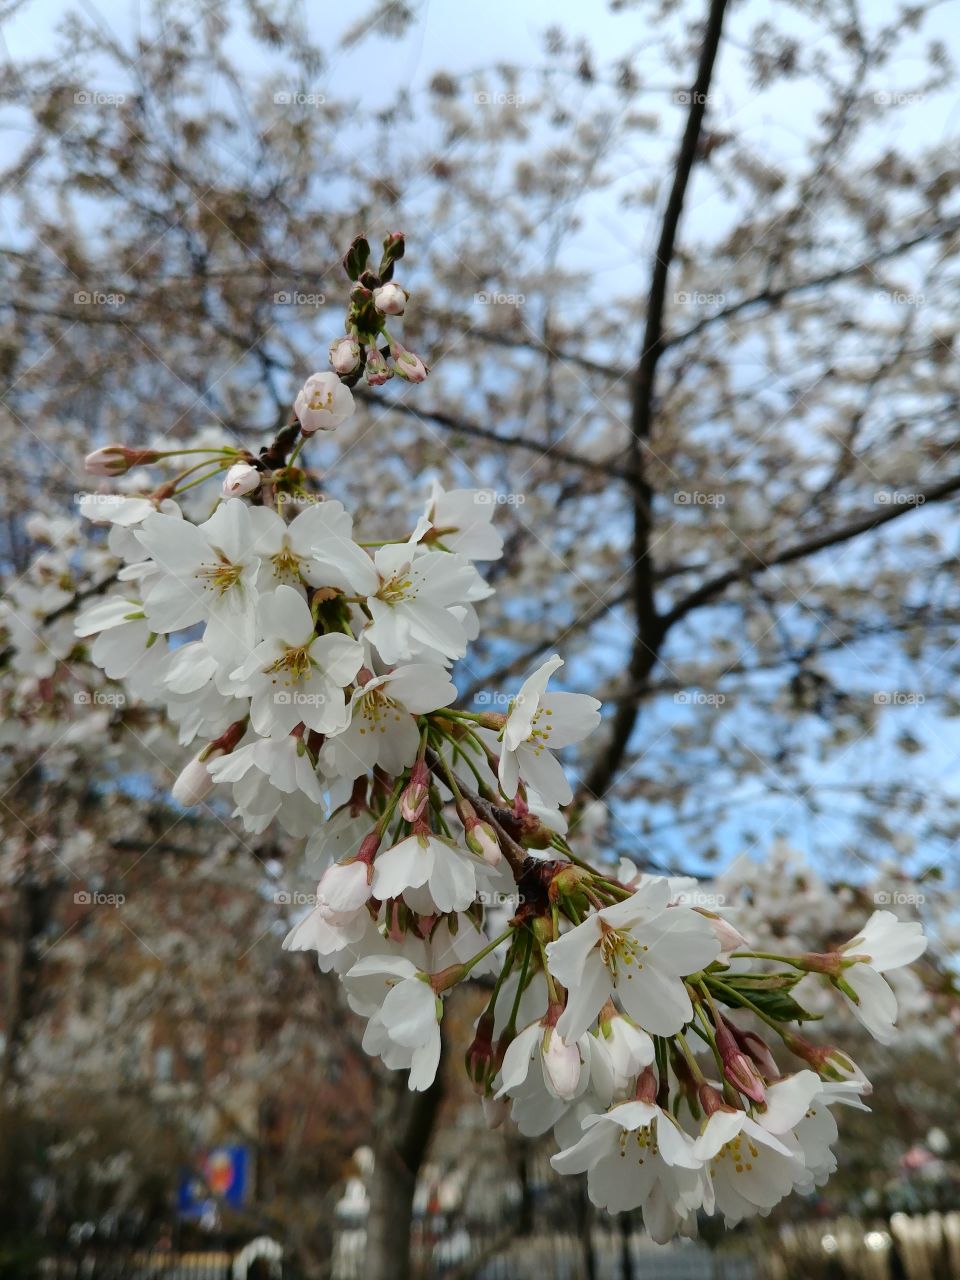 flowers on a branch